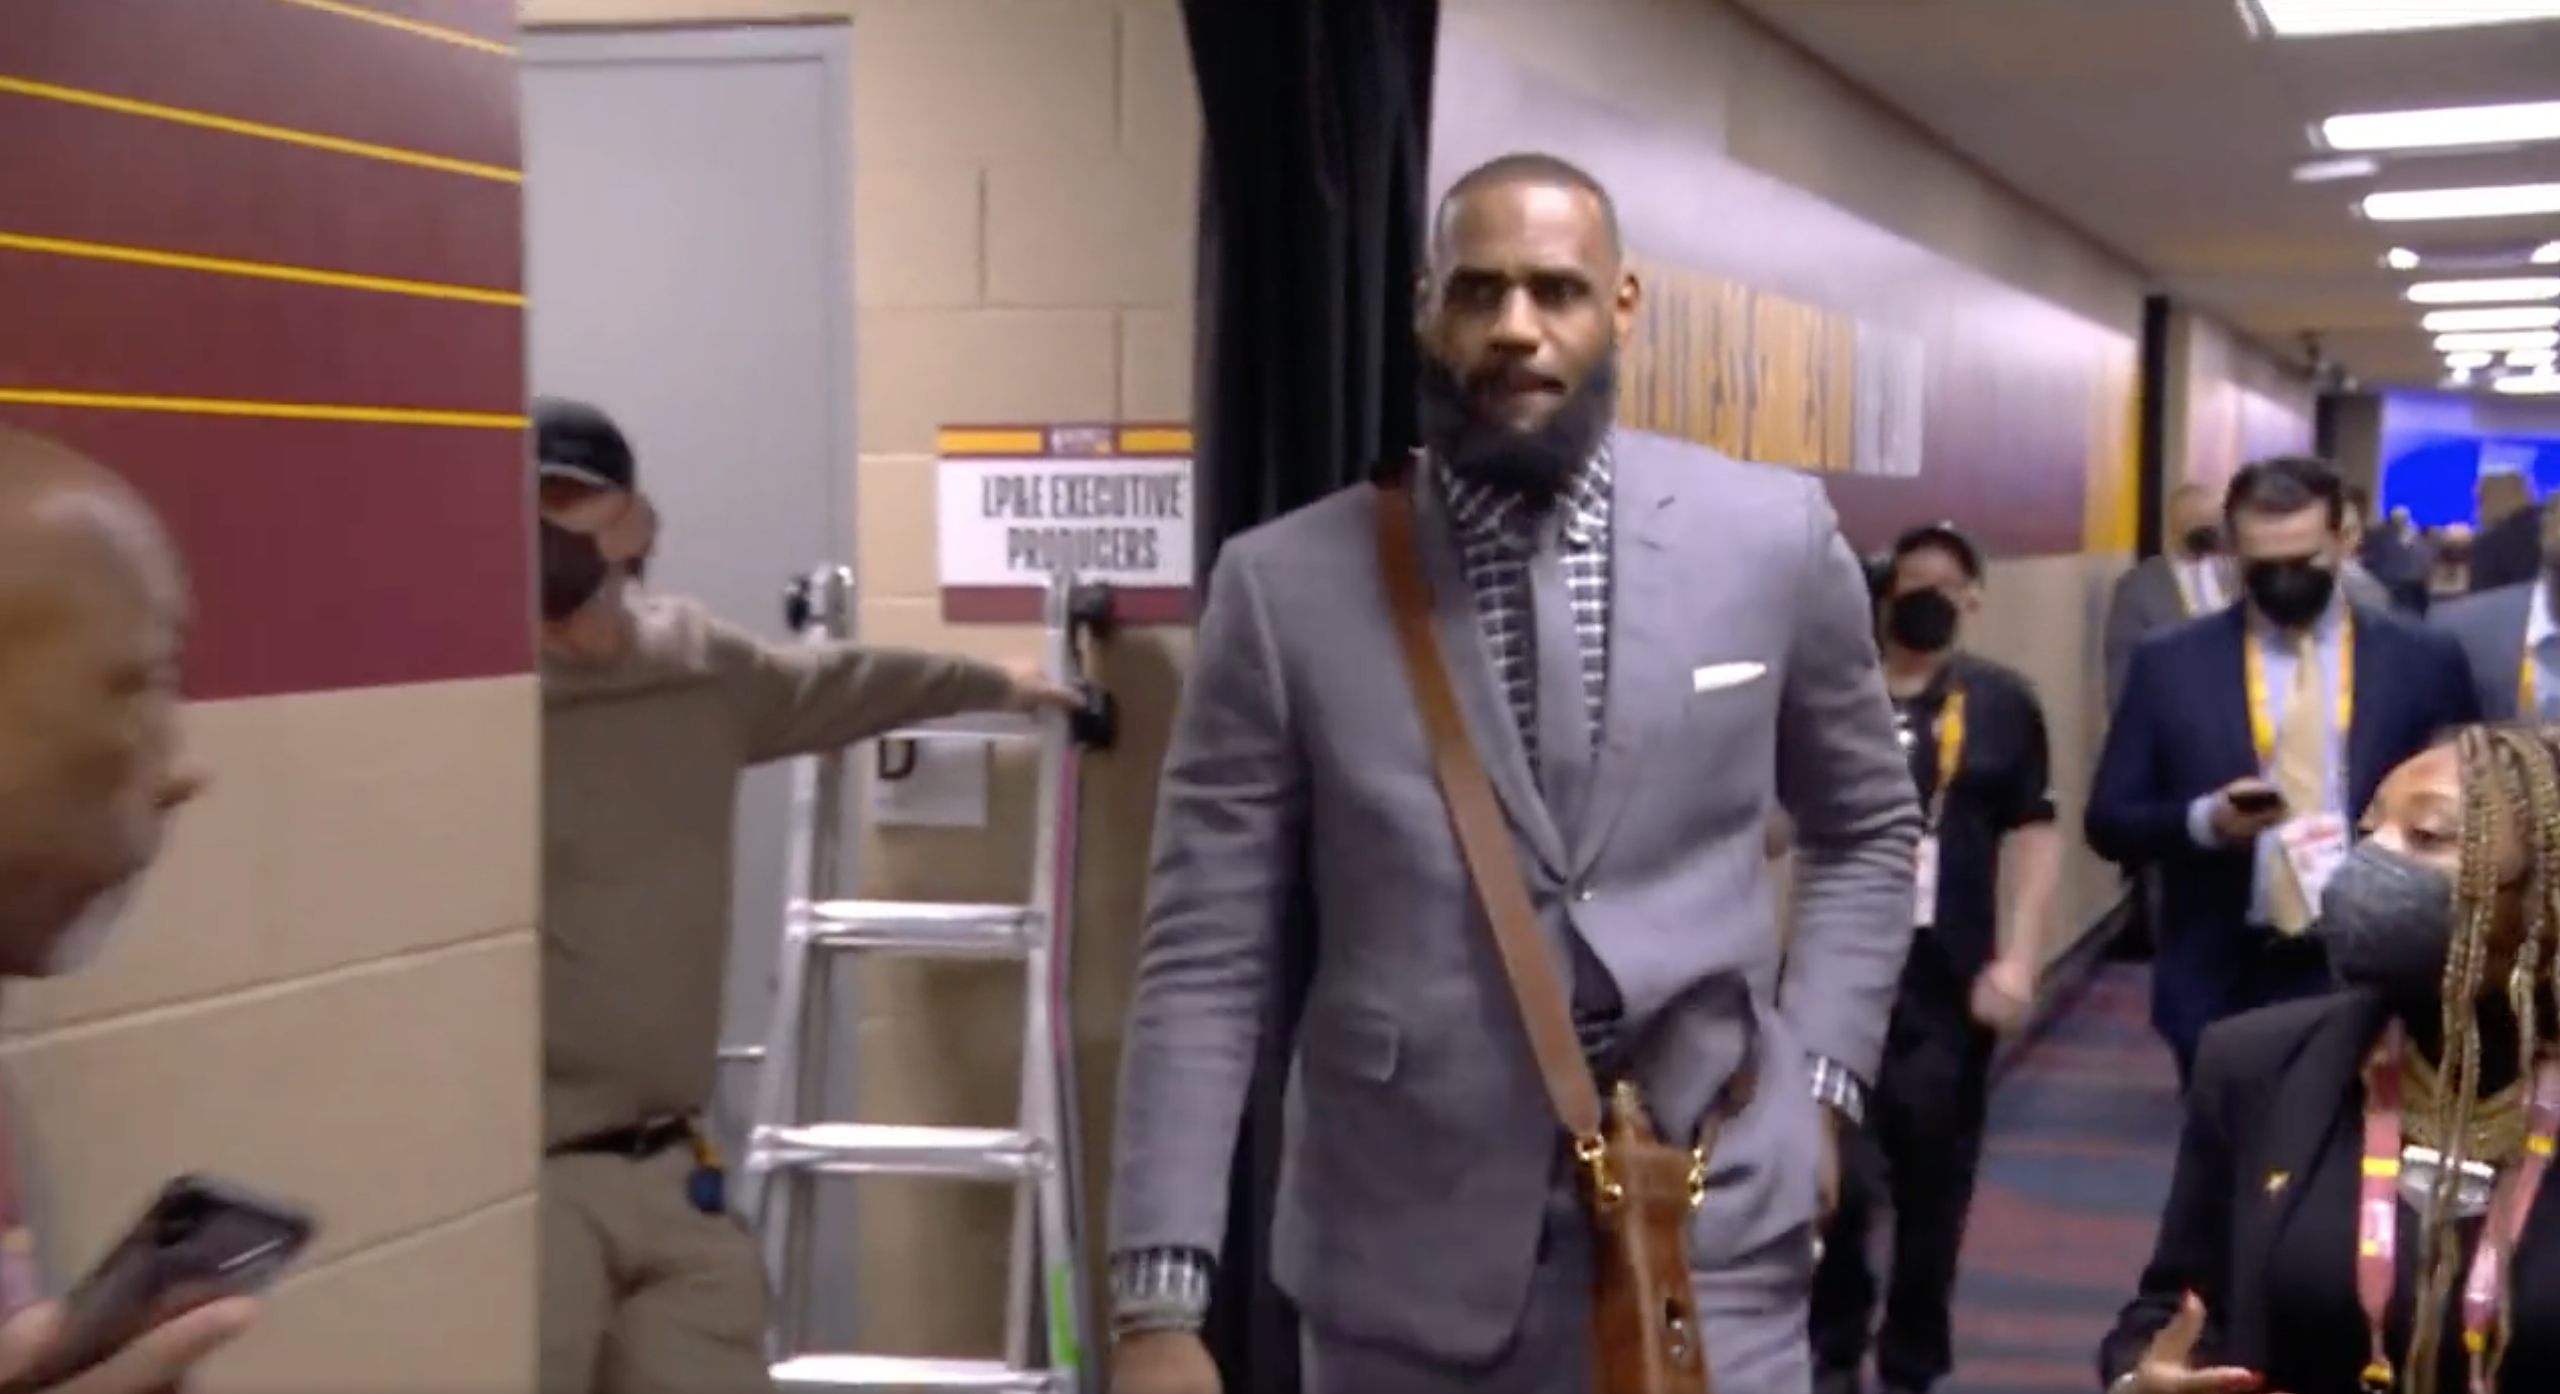 LeBron James arrives for LA Lakers opener in $28,000 Louis Vuitton outfit  including $11,000 Speedy Bandouliere 40 bag